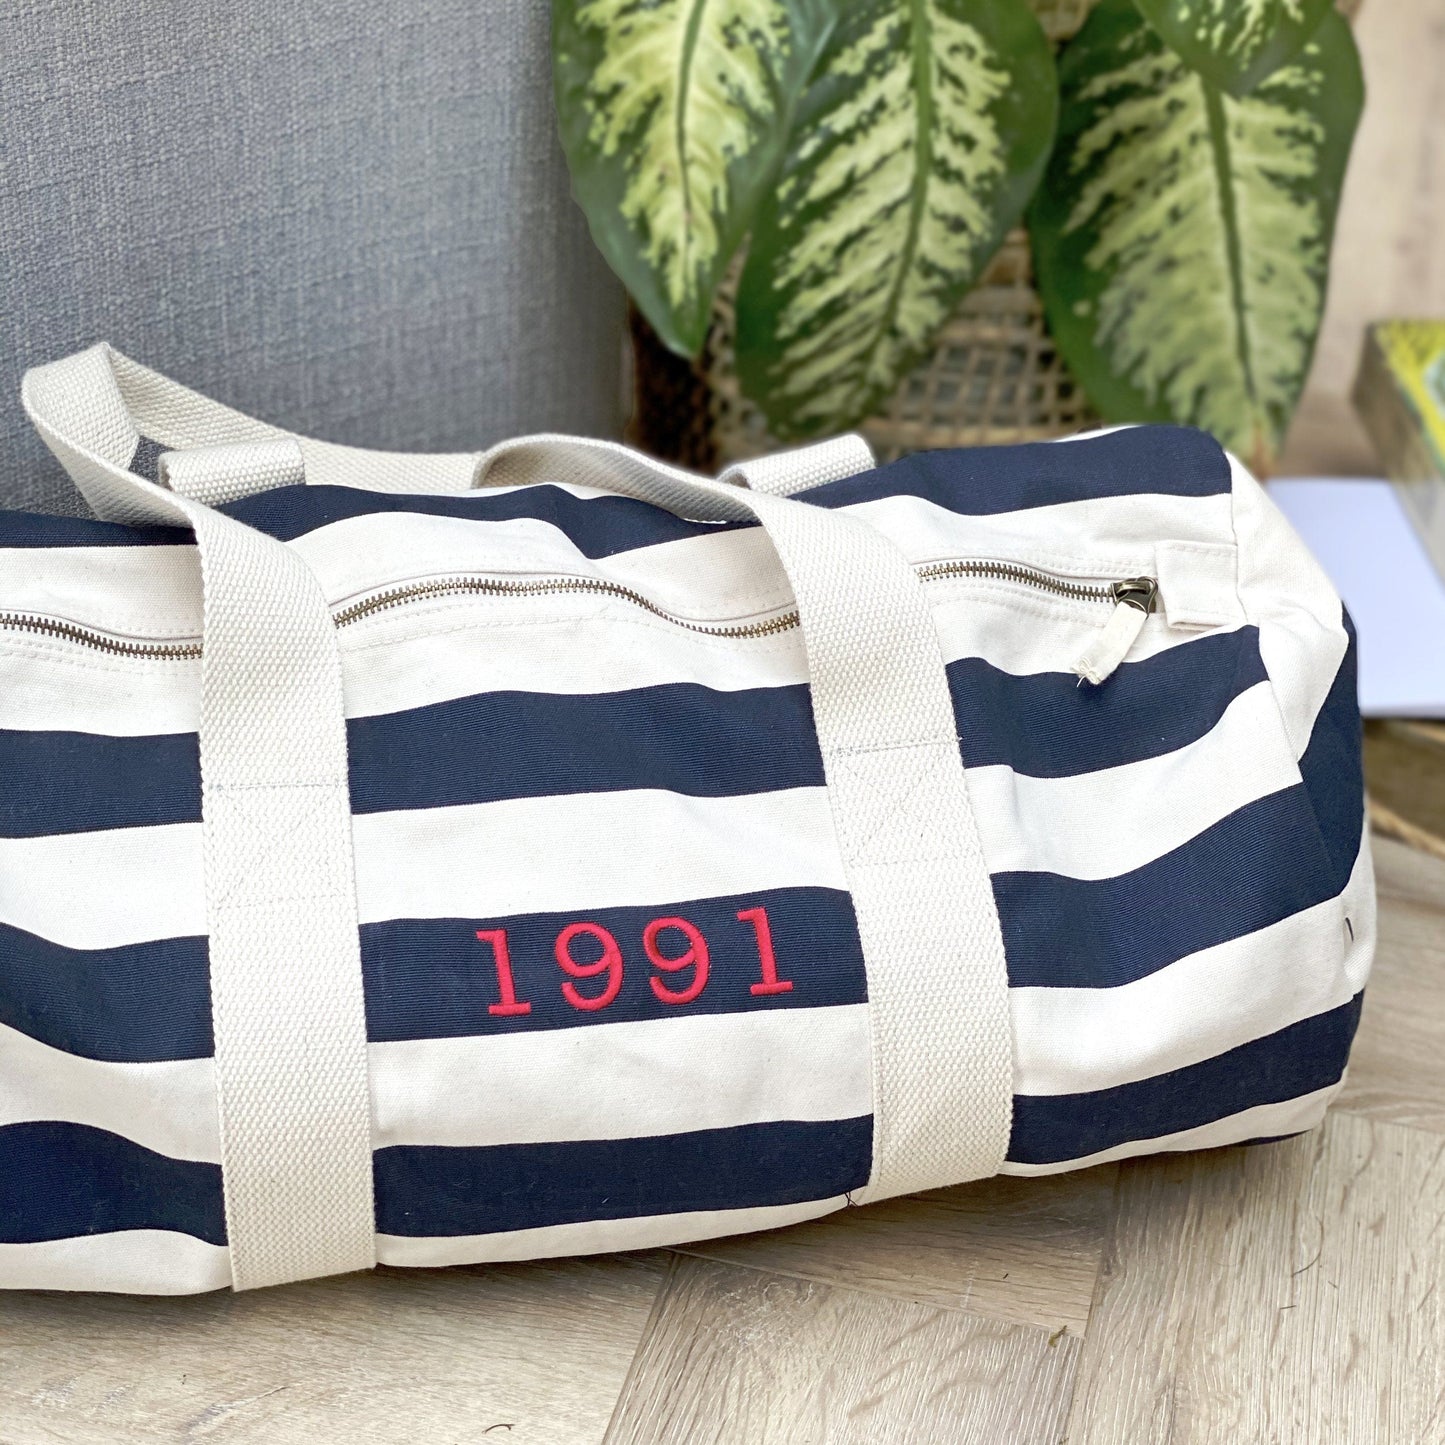 Embroidered Year Duffel Bag